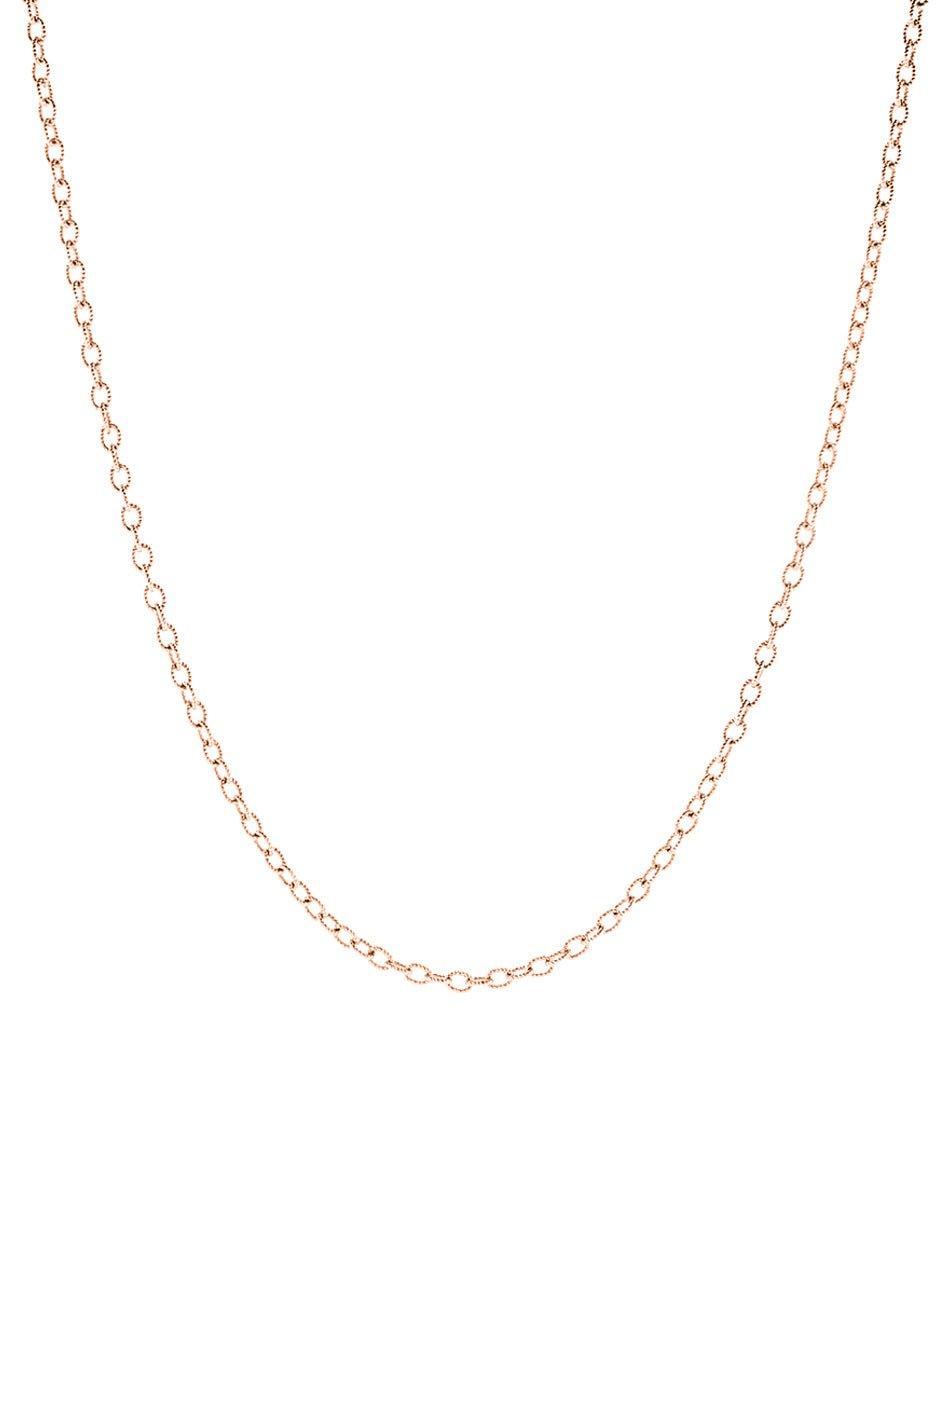 Irene Neuwirth 18kt gold oval link chain necklace - Yellow